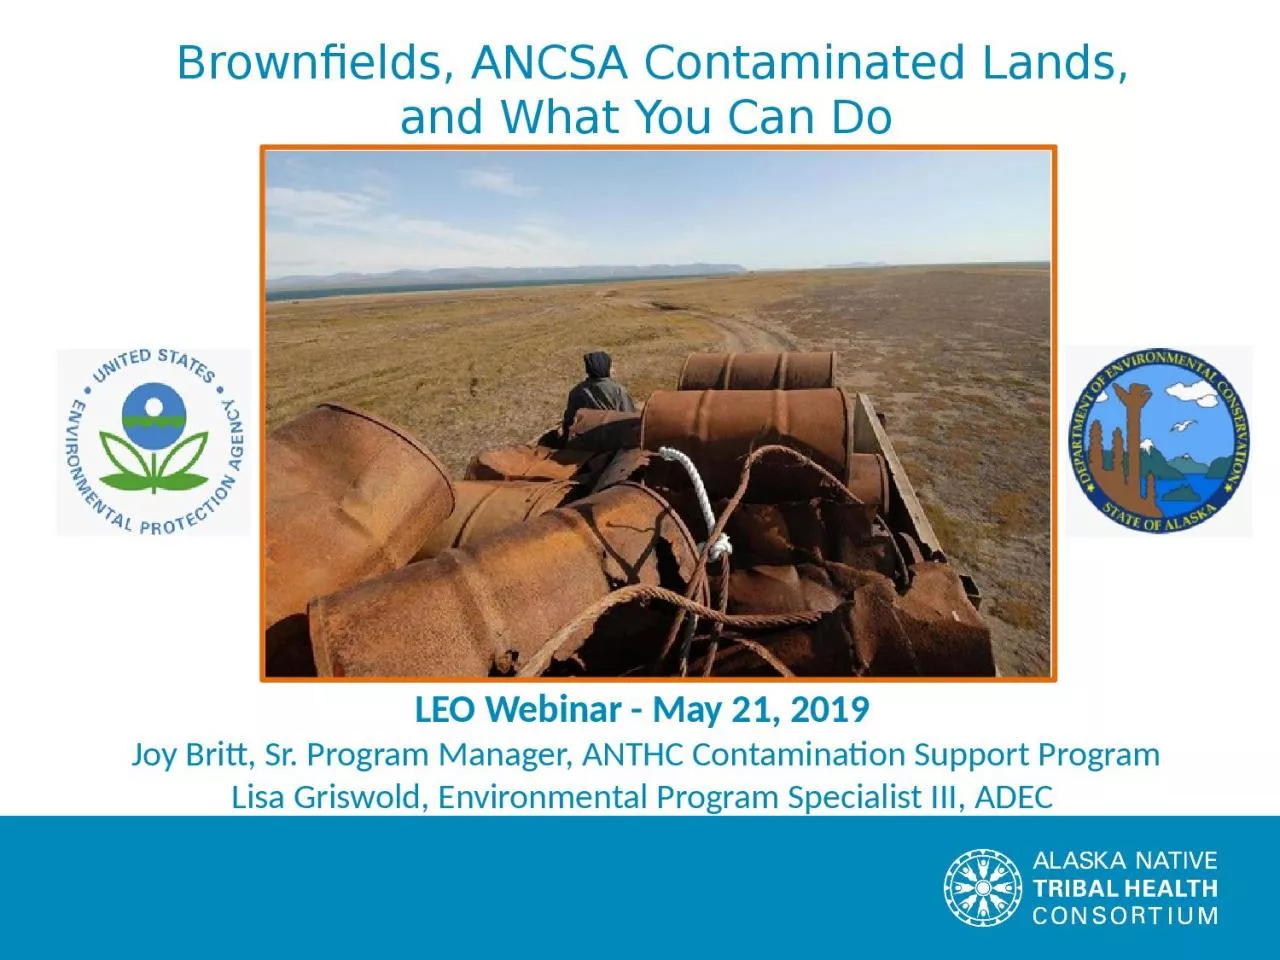 Brownfields, ANCSA Contaminated Lands, and What You Can Do